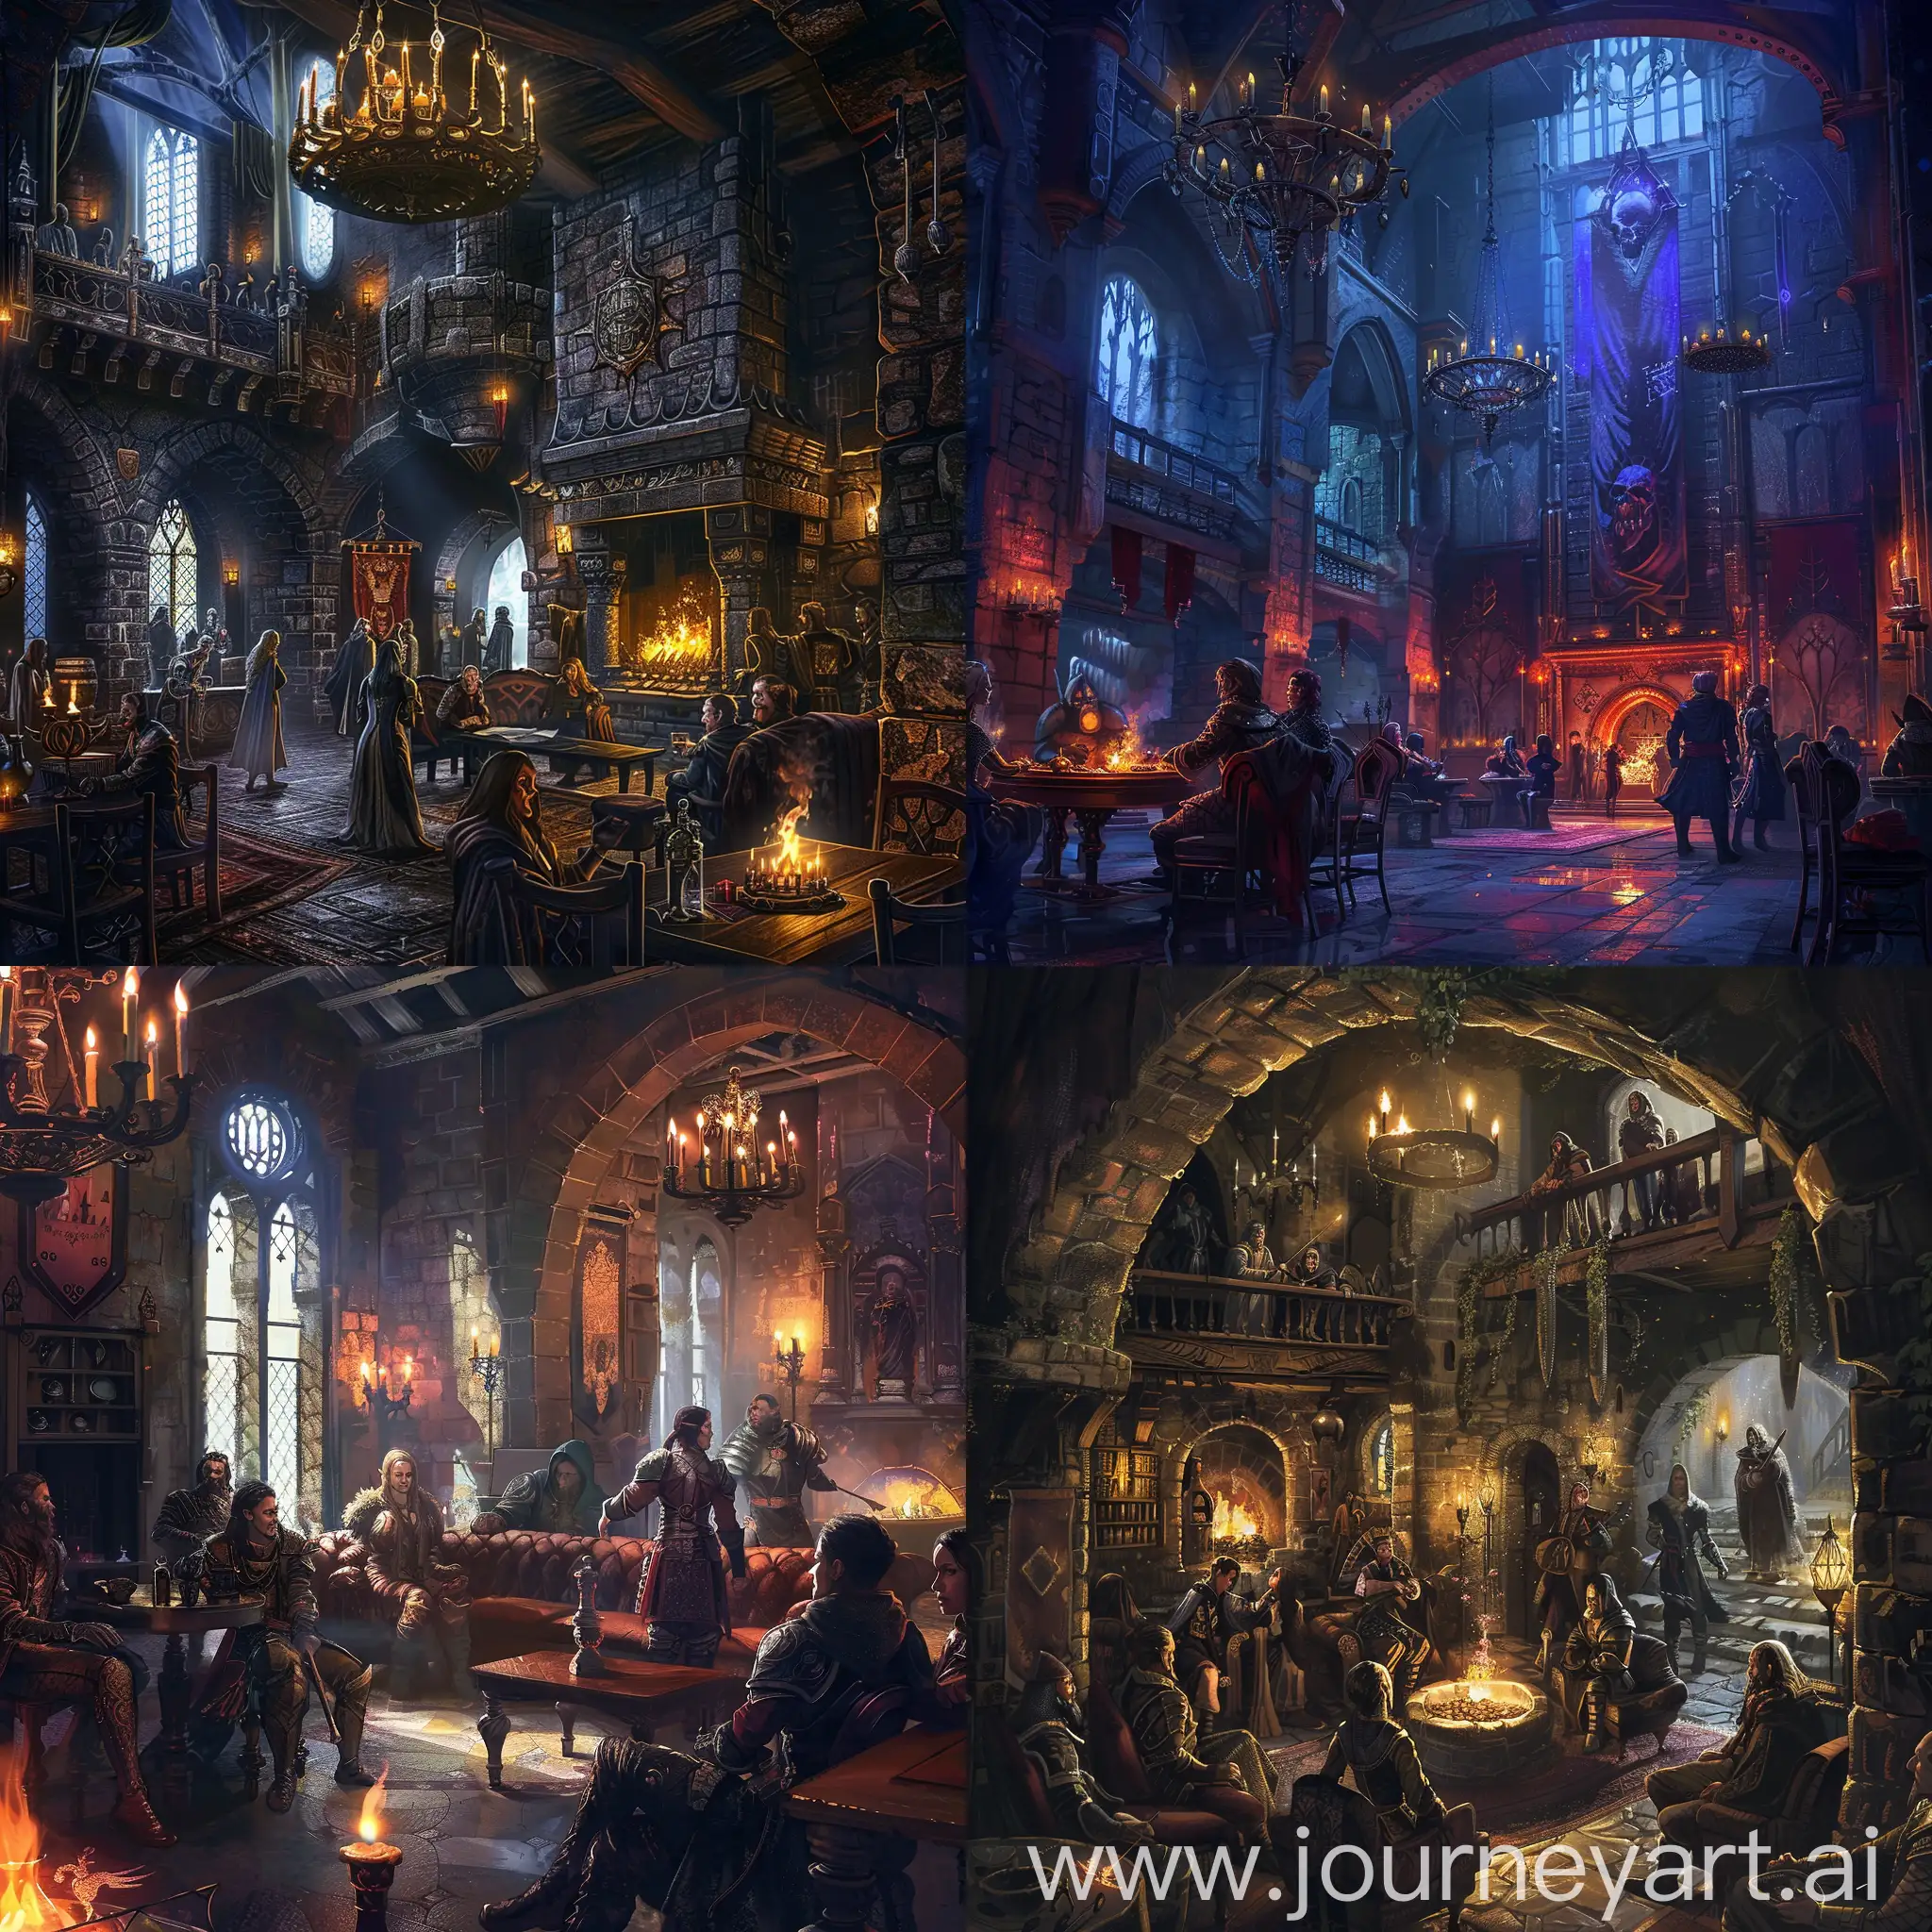 Medieval-Castle-Lounge-with-Dark-Fantasy-Characters